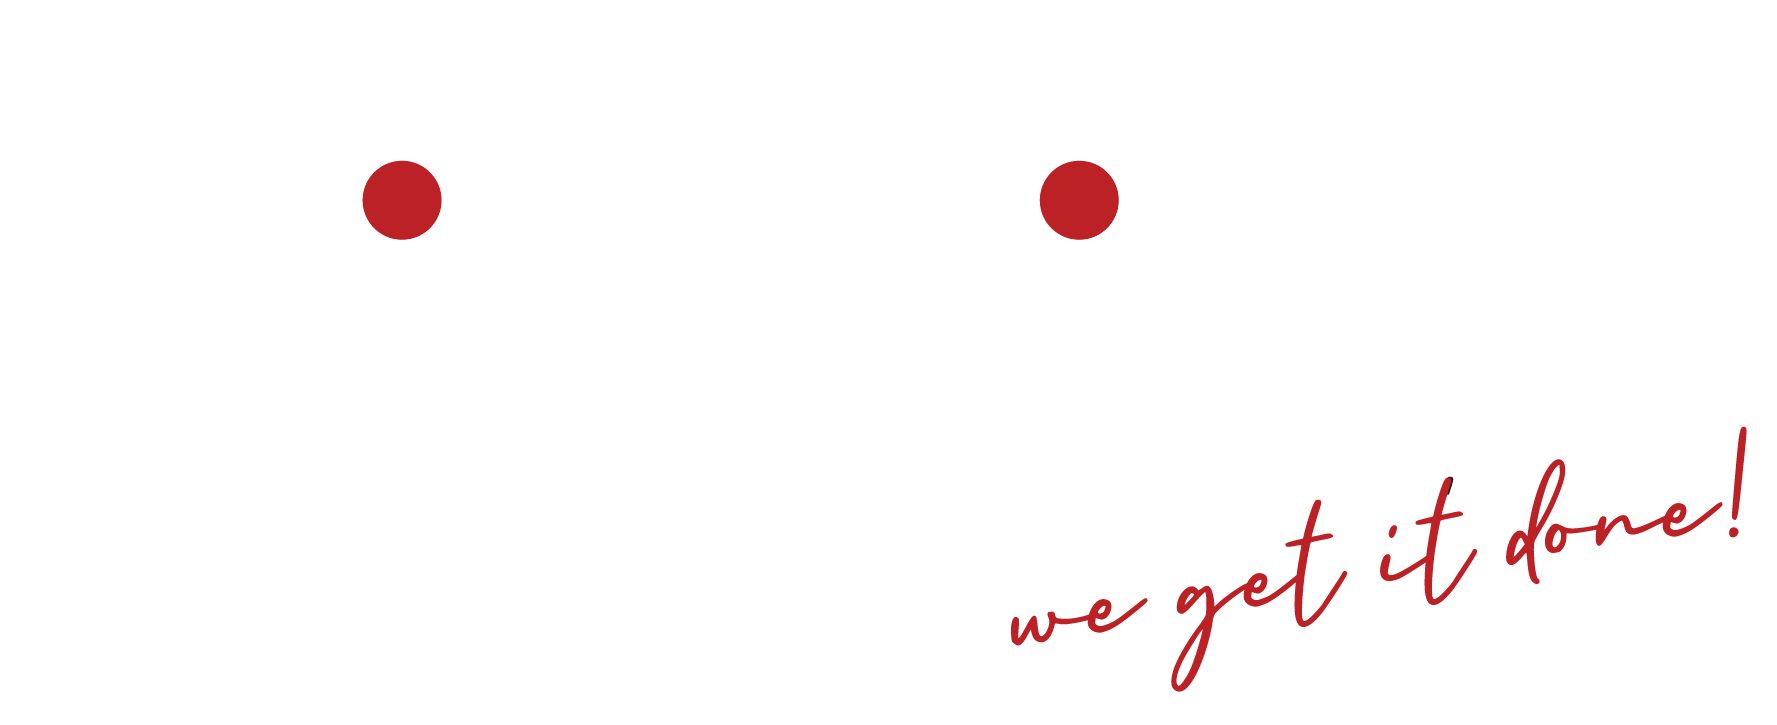 Booth management Consulting BMC logo